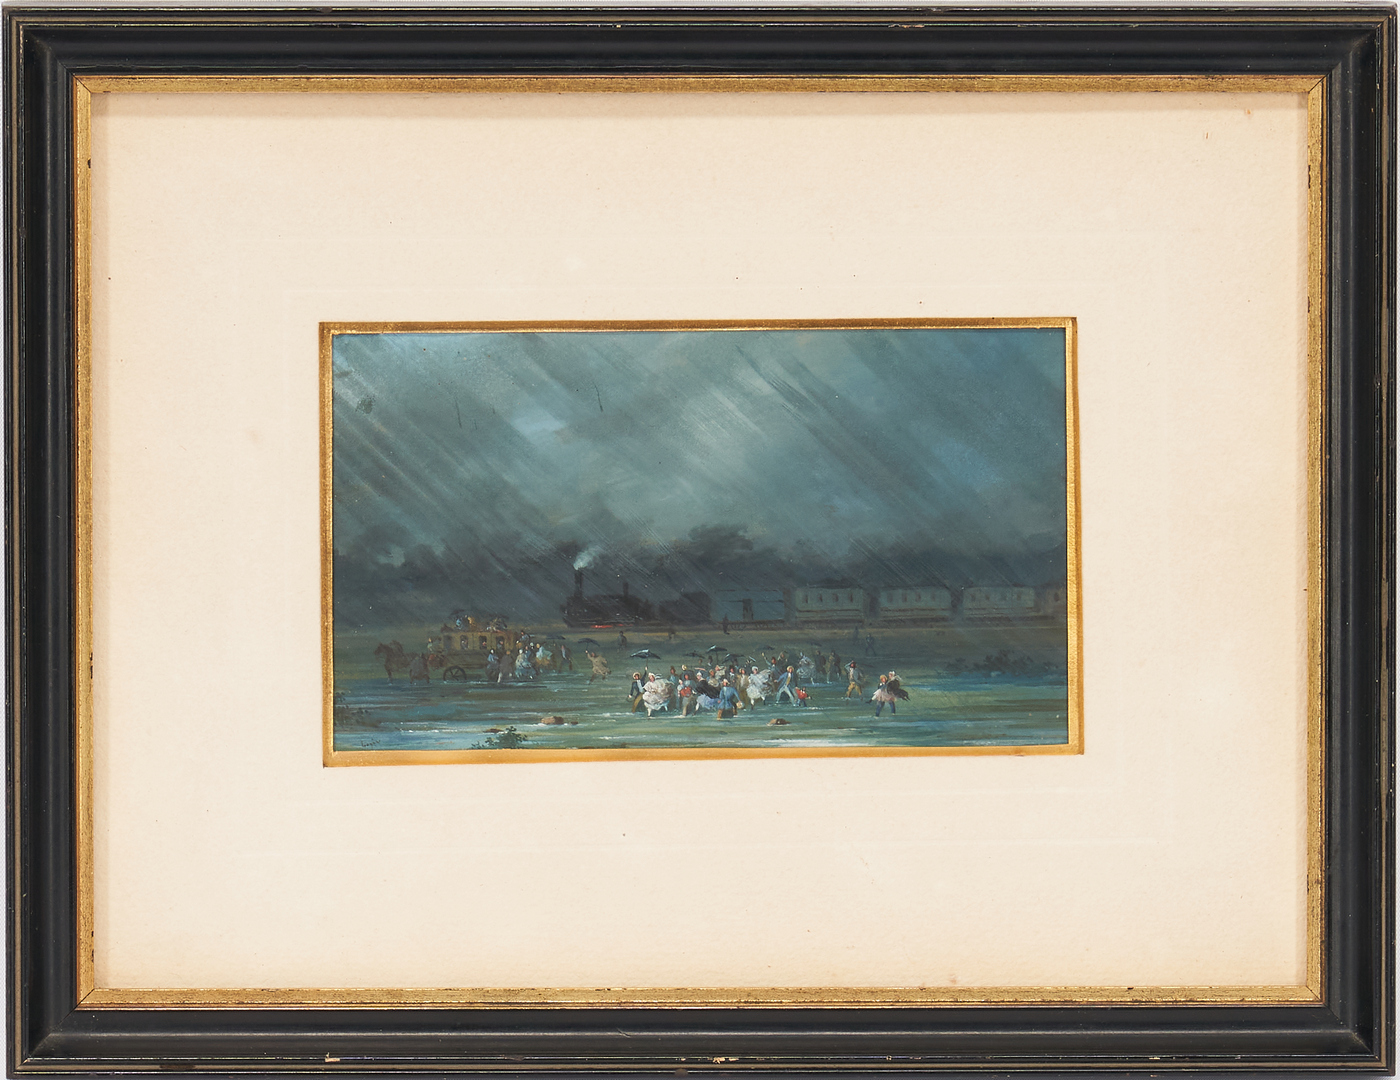 Lot 1014: Small Painting, Flood Scene with Train, illegibly signed